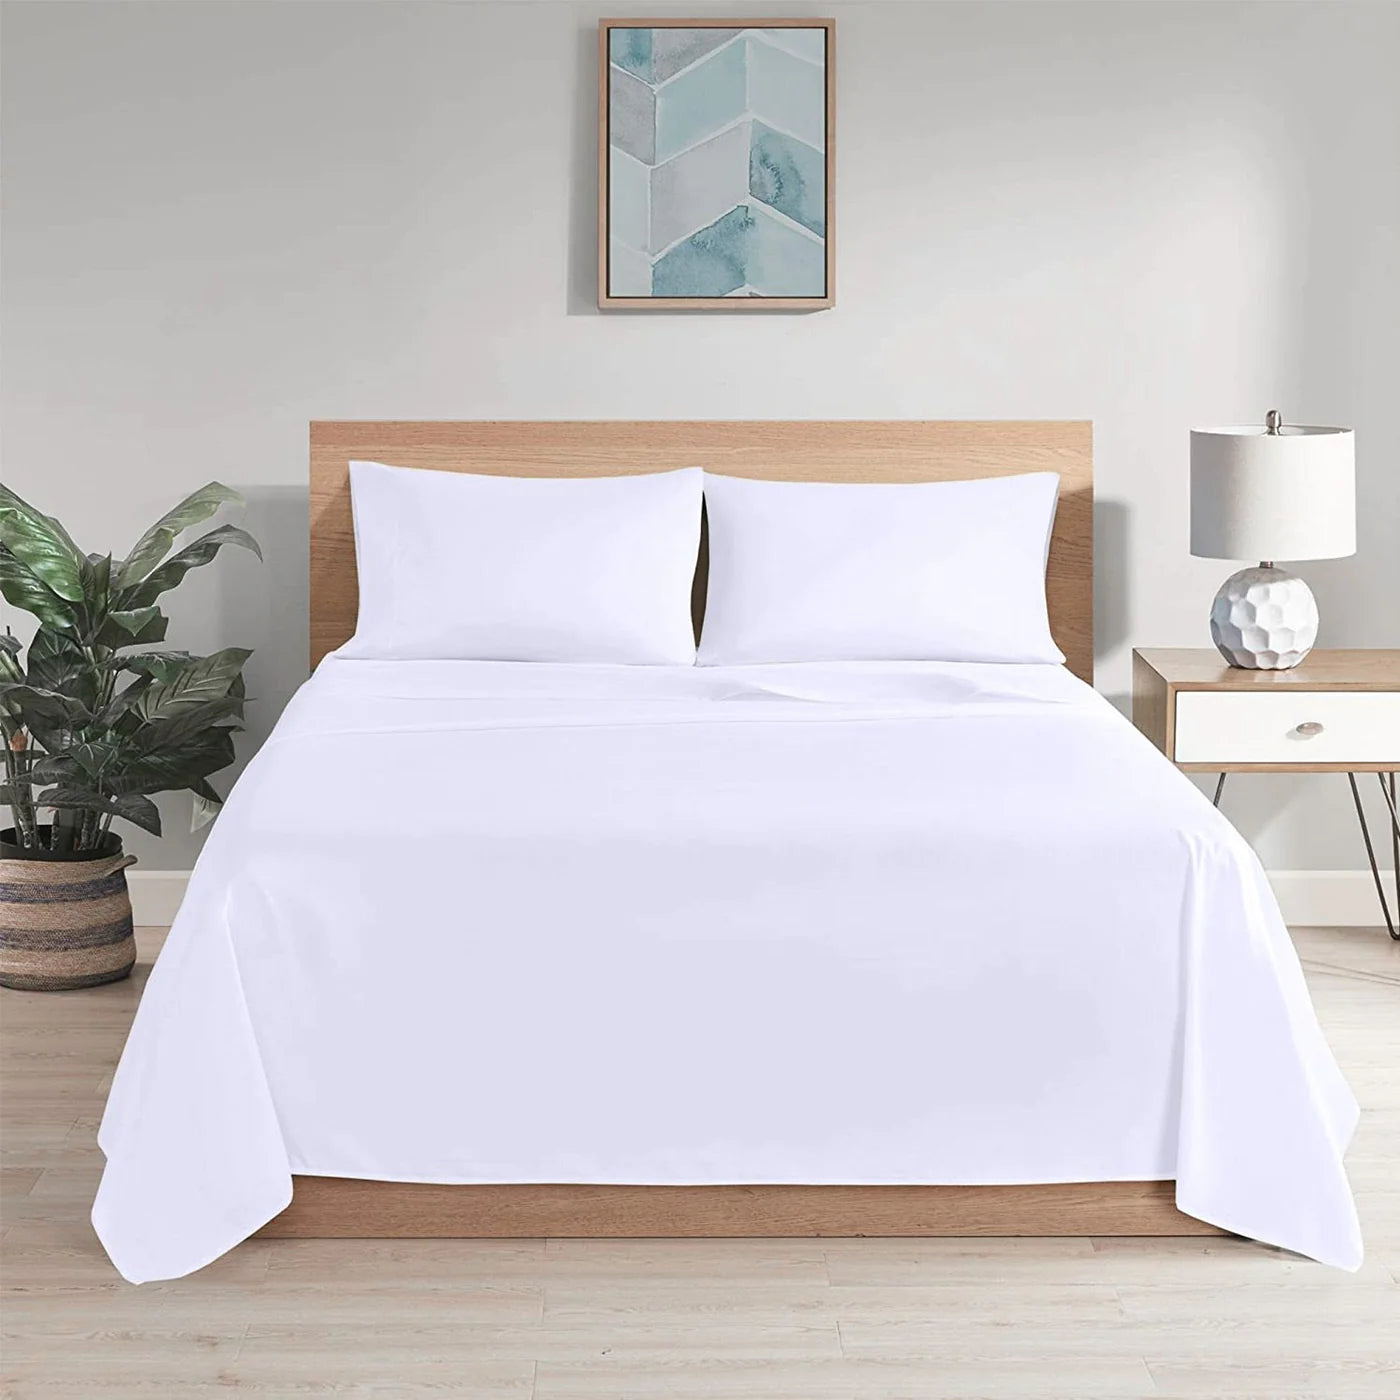 Super Soft, Breathable Moss Bed Sheets – The Sky Bedding